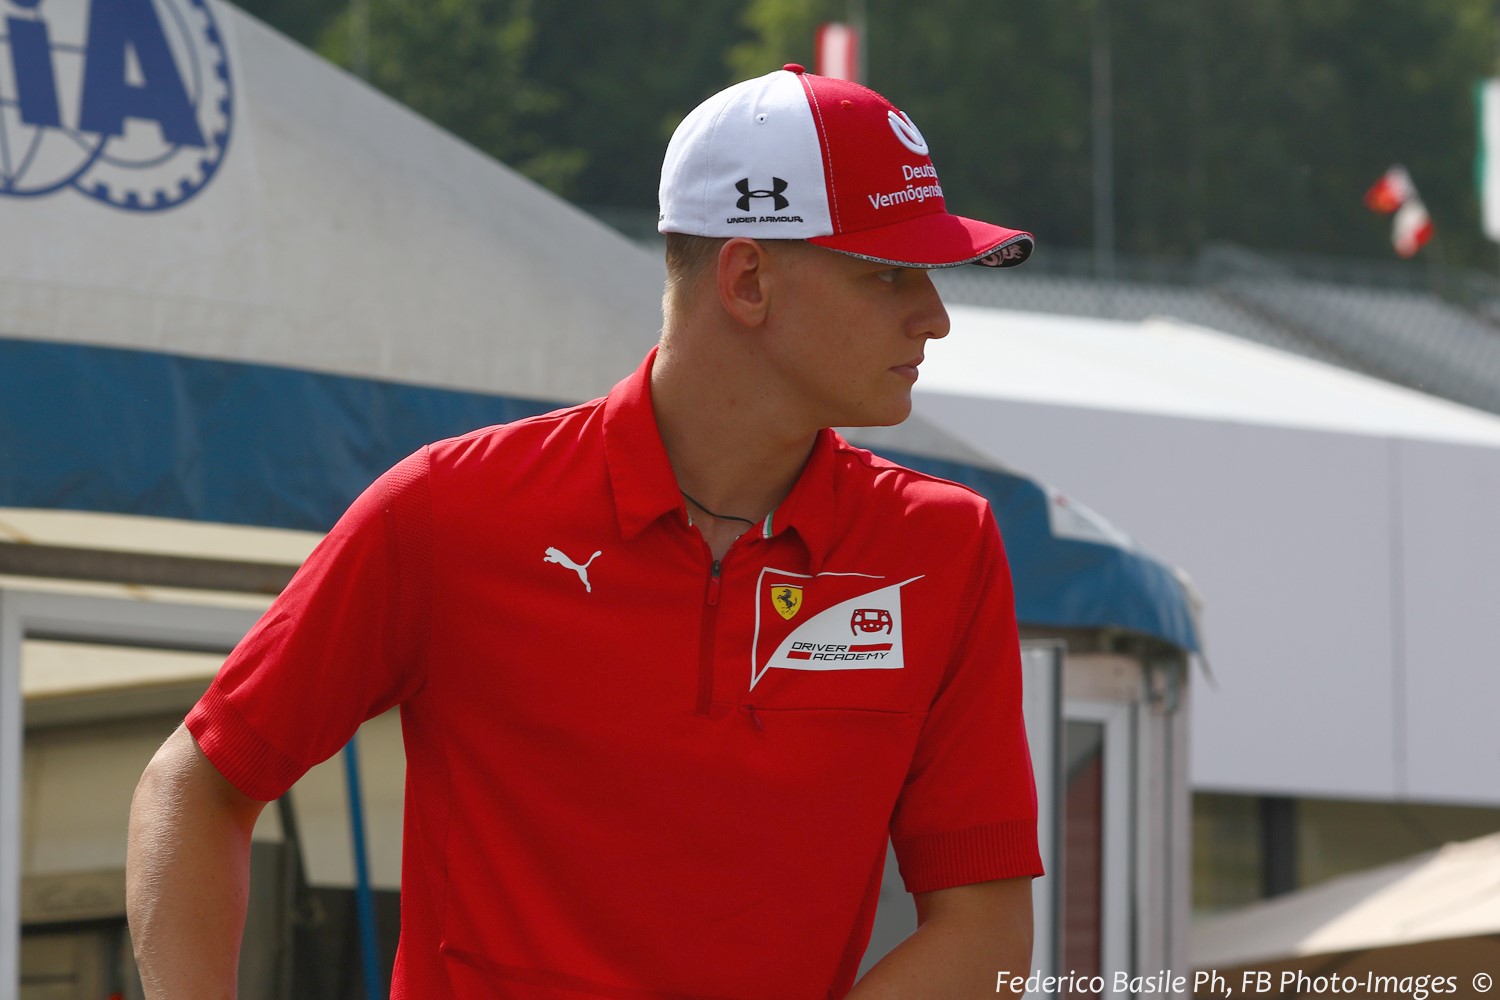 Mick Schumacher did not inherit all of his father's genes